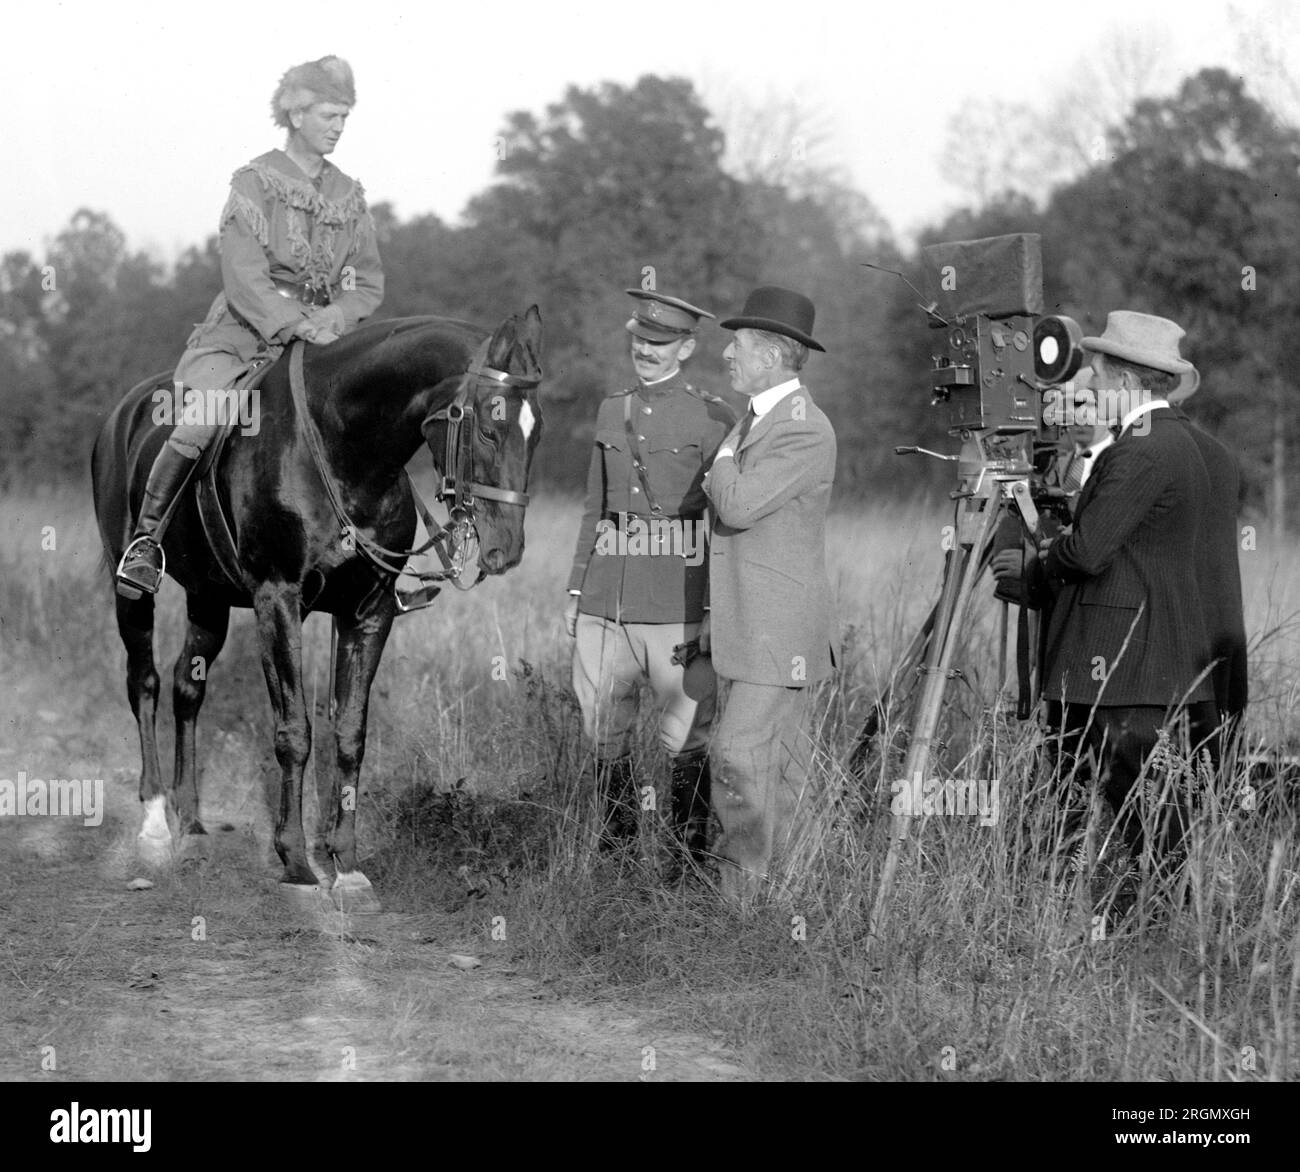 Director D.W. Griffith on location filming a movie, speaking with actors ca. 1923 Stock Photo